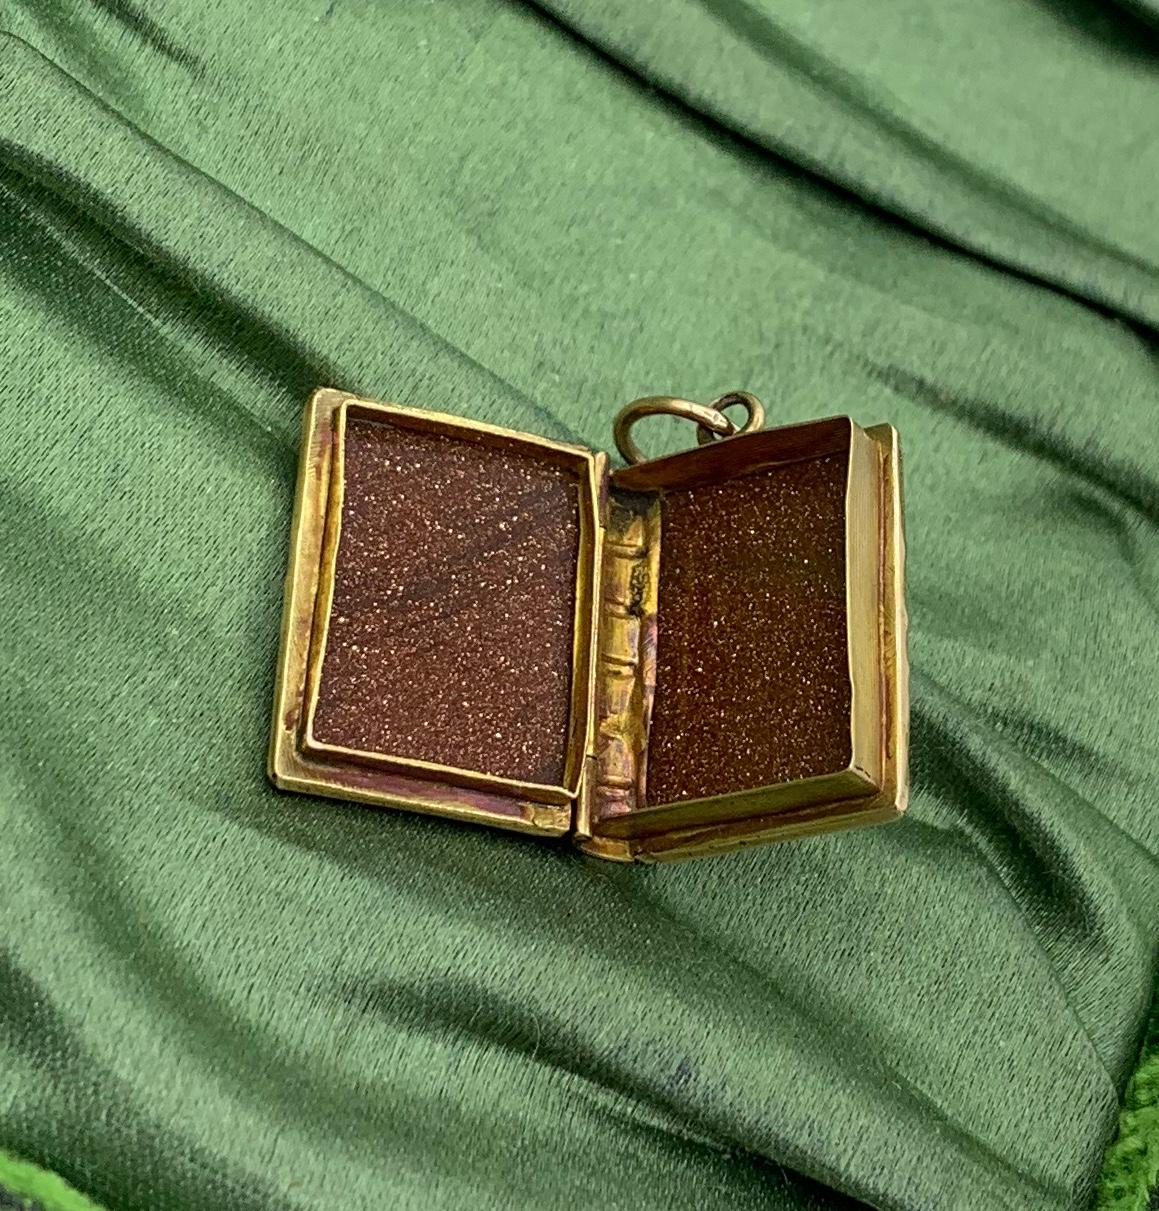 THIS IS A CLASSIC BOOK FORM  VICTORIAN PICTURE LOCKET PENDANT OR CHARM IN SOLID 14 KARAT GOLD WITH BEAUTIFUL NATURAL GOLDSTONE FRONT AND BACK!
The solid 14 Karat gold locket with Goldstone front and back in the form of an opening book is just